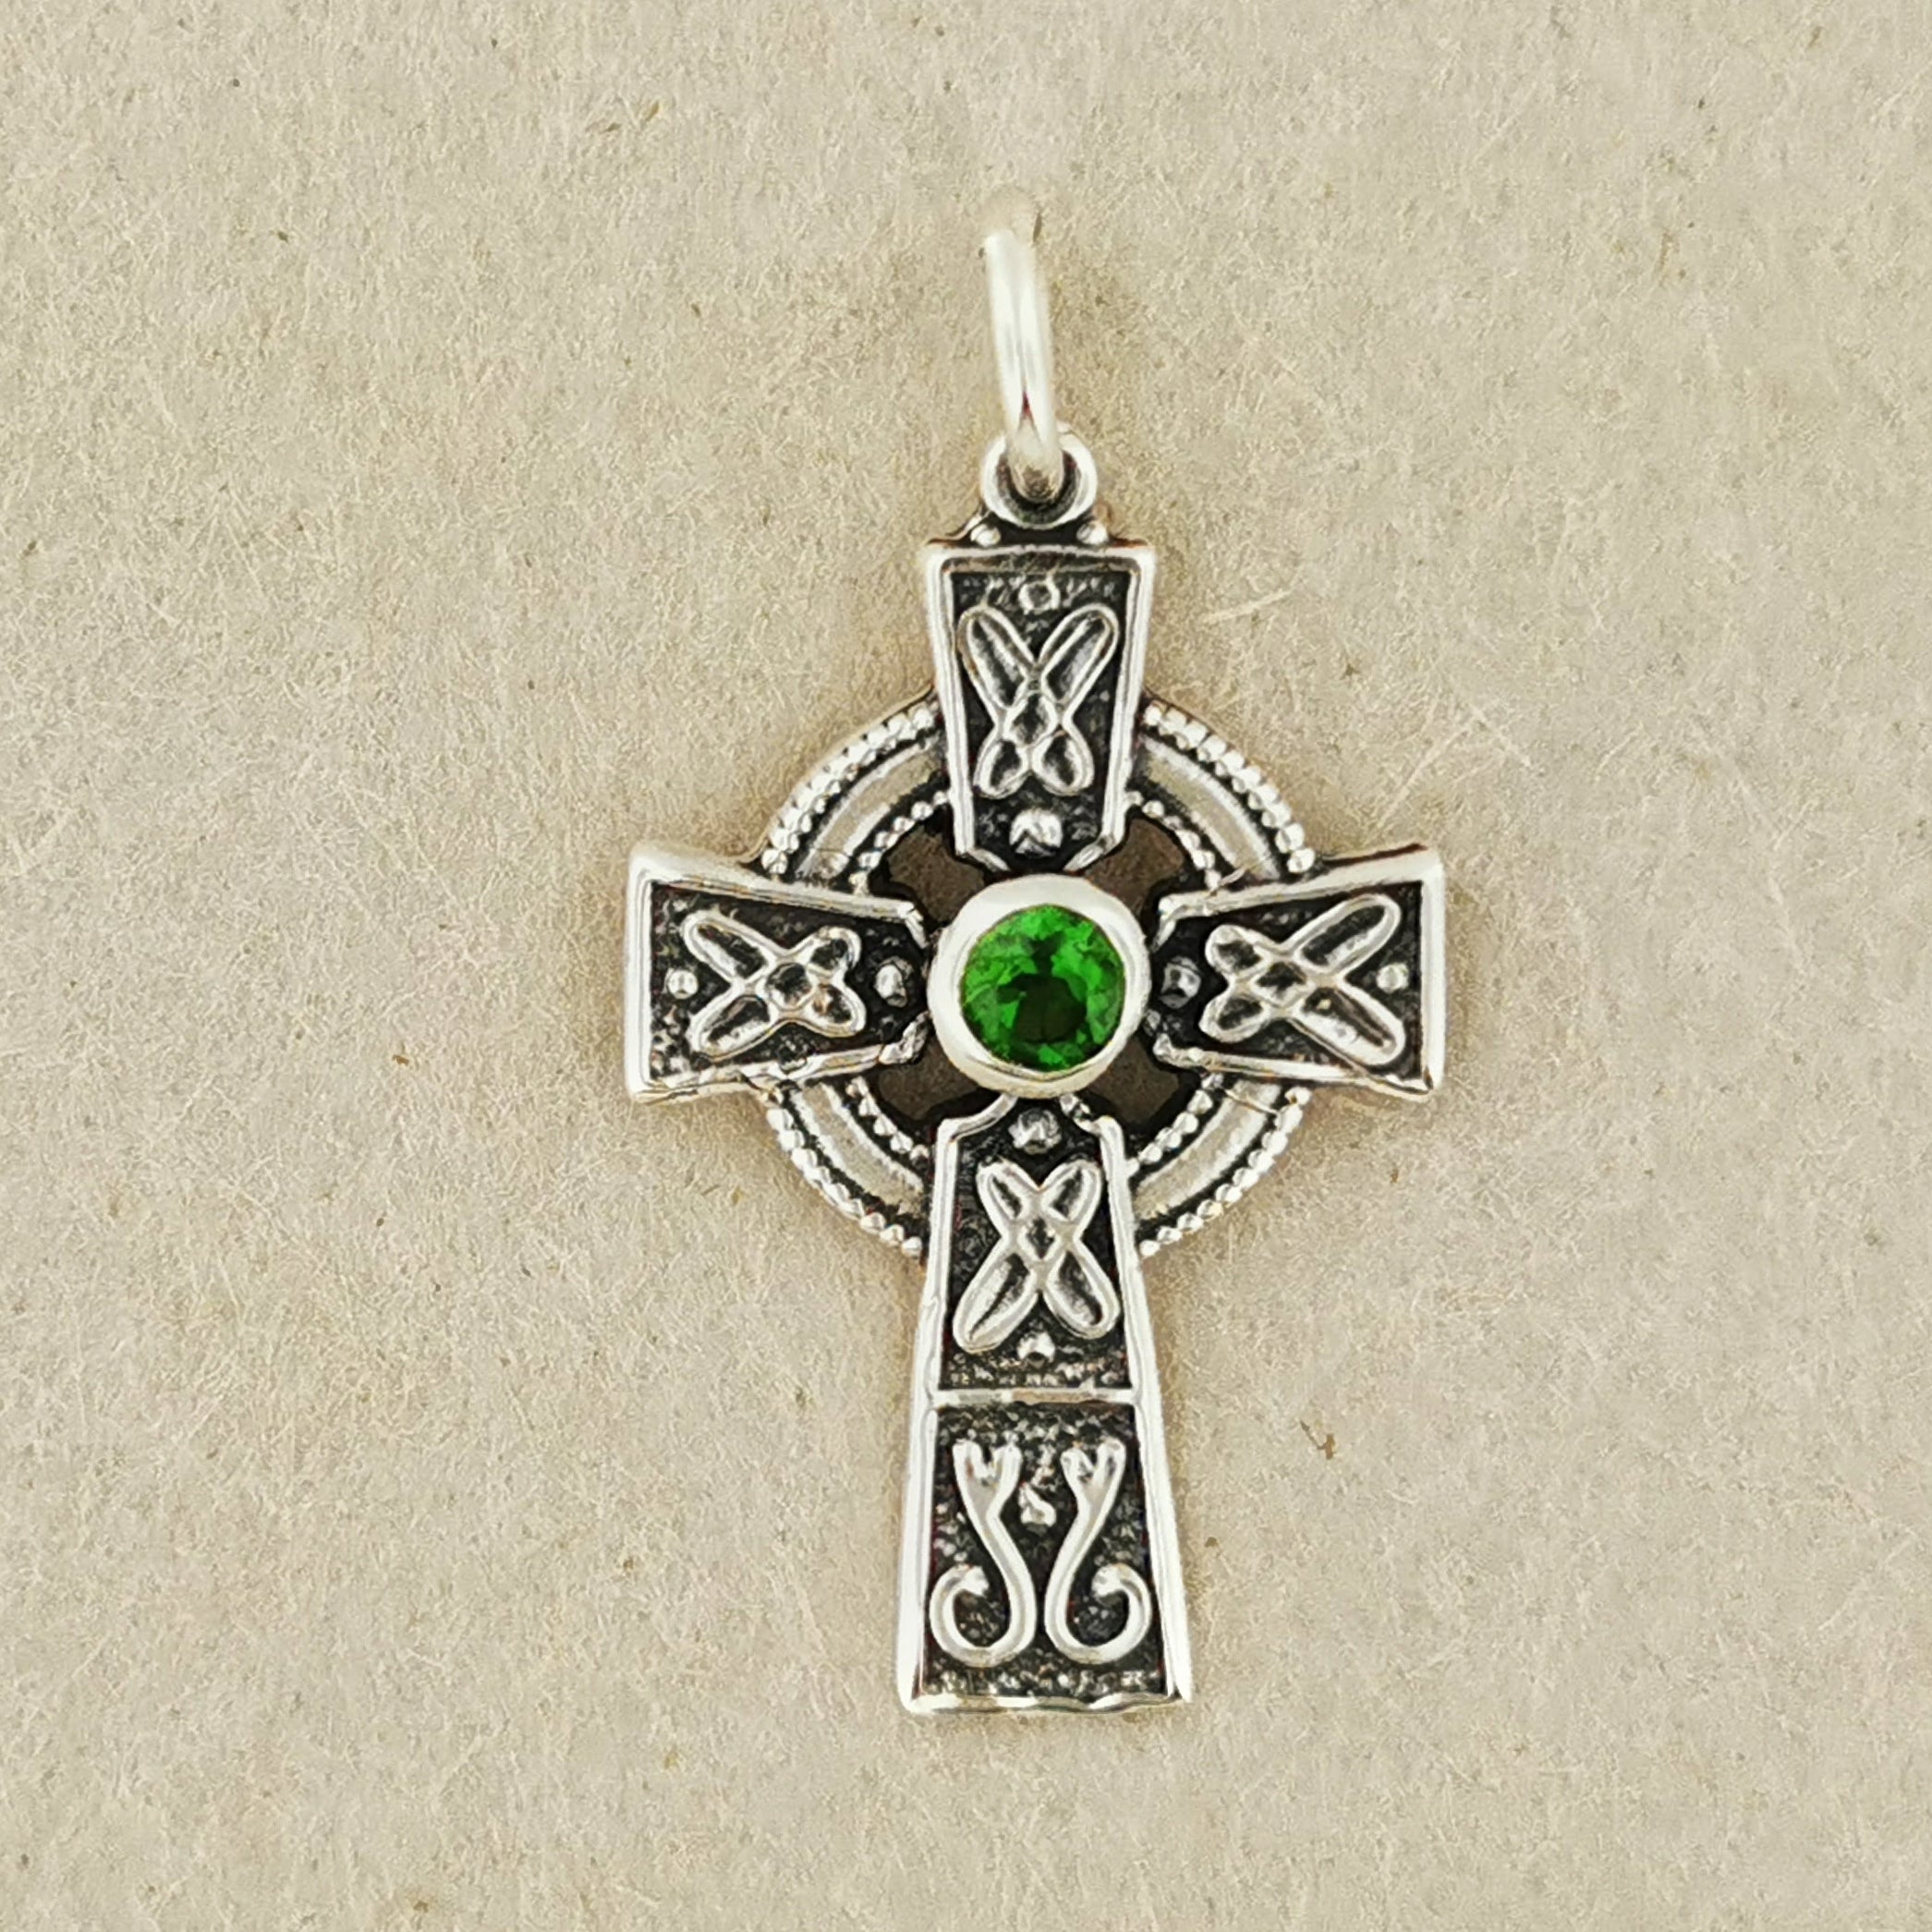 Stunning Dancing Stone Celtic Cross Pendant - Our Jewelry is Timeless -  Celtic Elegance